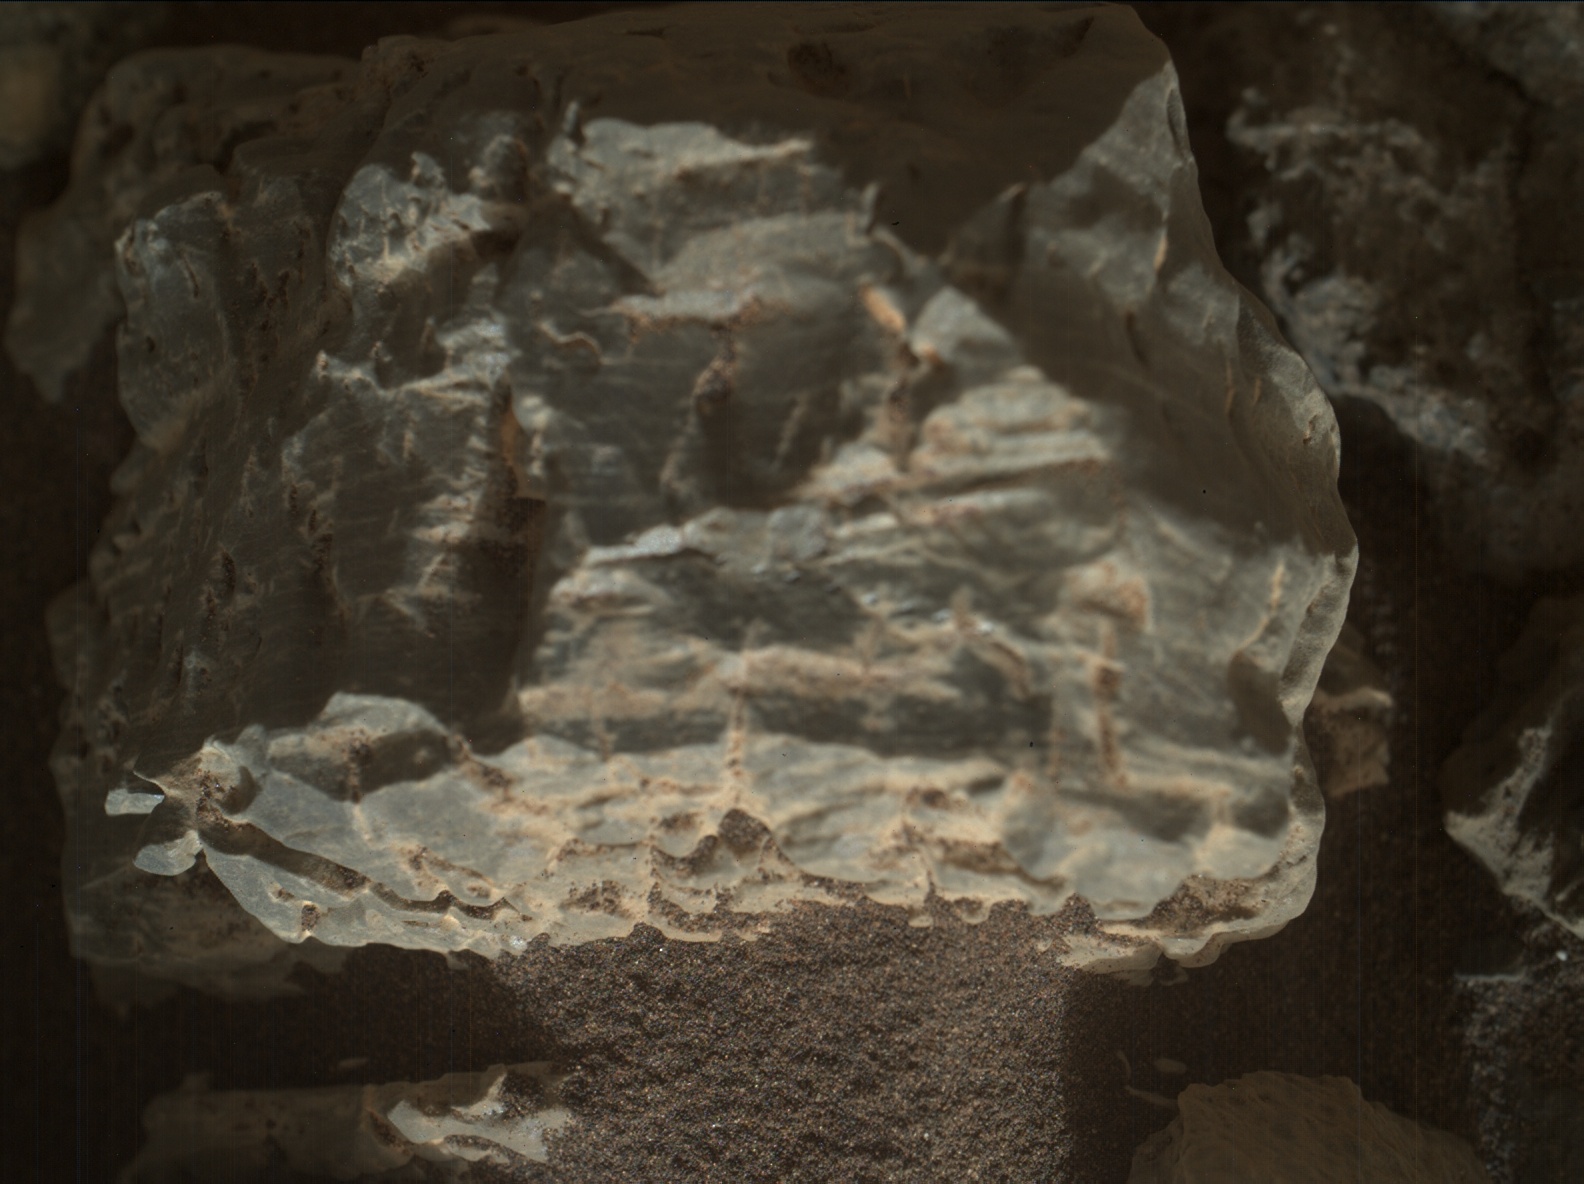 Nasa's Mars rover Curiosity acquired this image using its Mars Hand Lens Imager (MAHLI) on Sol 2019